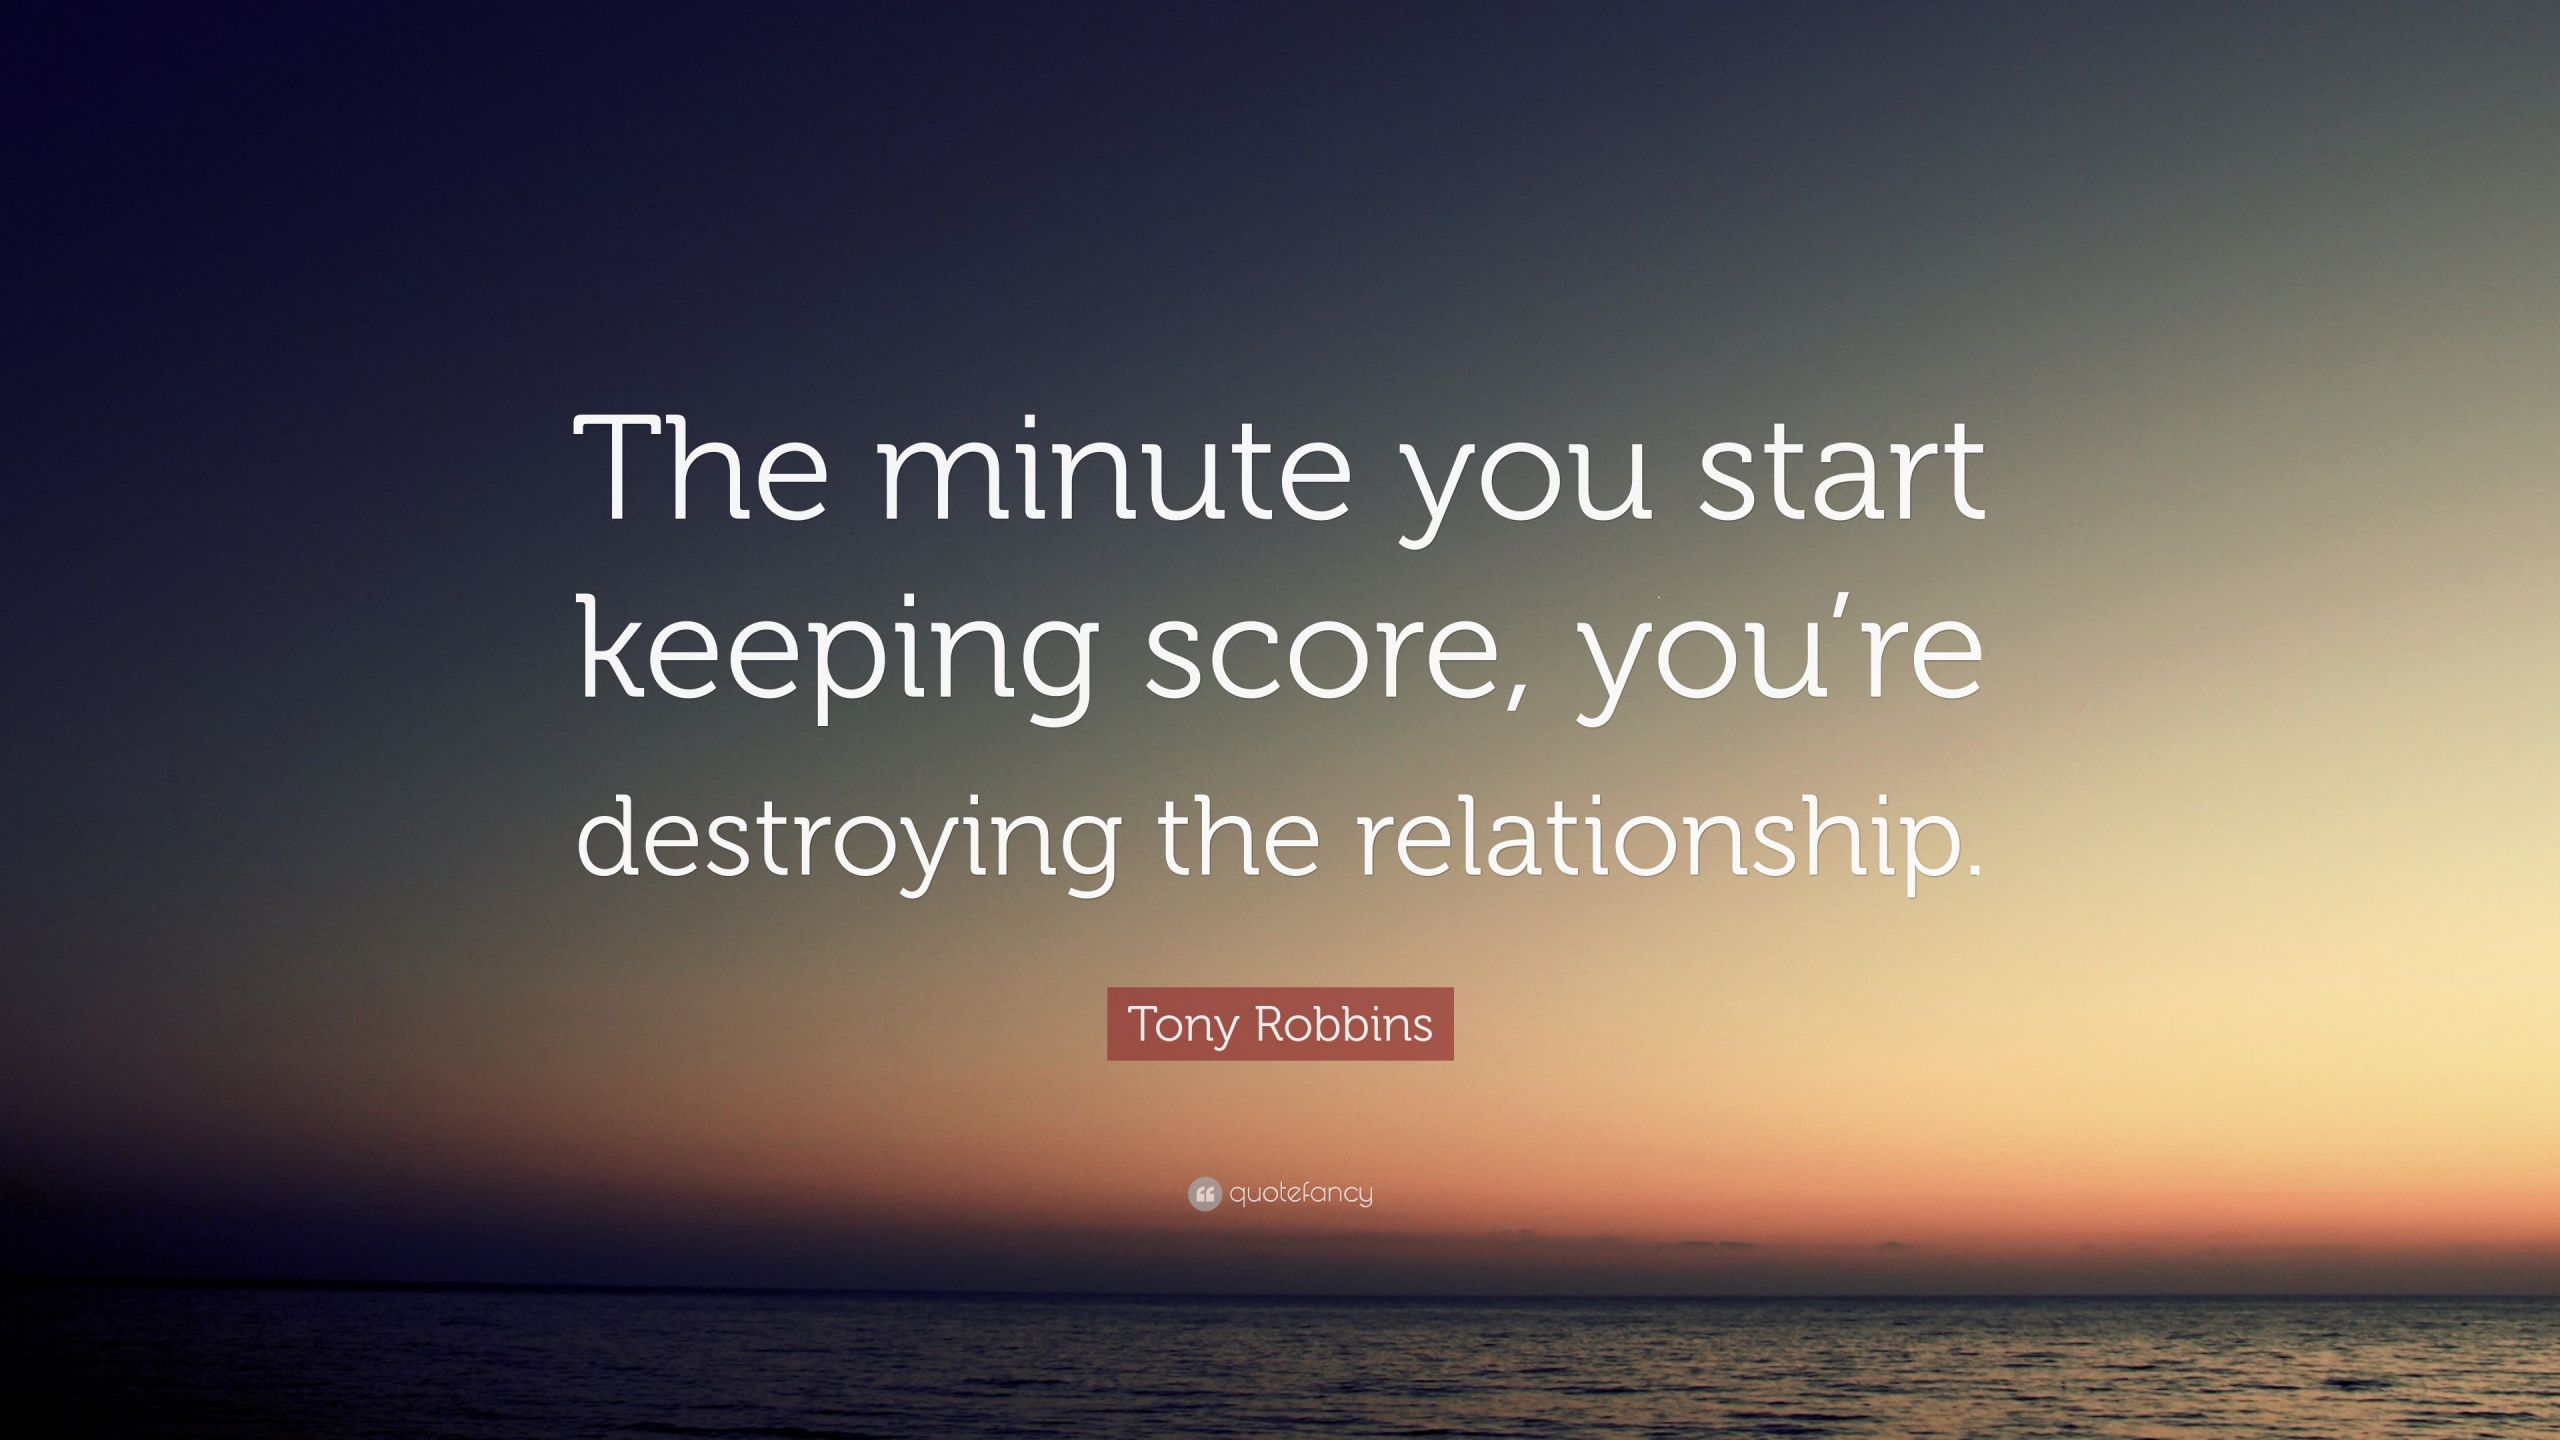 Tony Robbins Quotes On Relationships
 Tony Robbins Quote “The minute you start keeping score